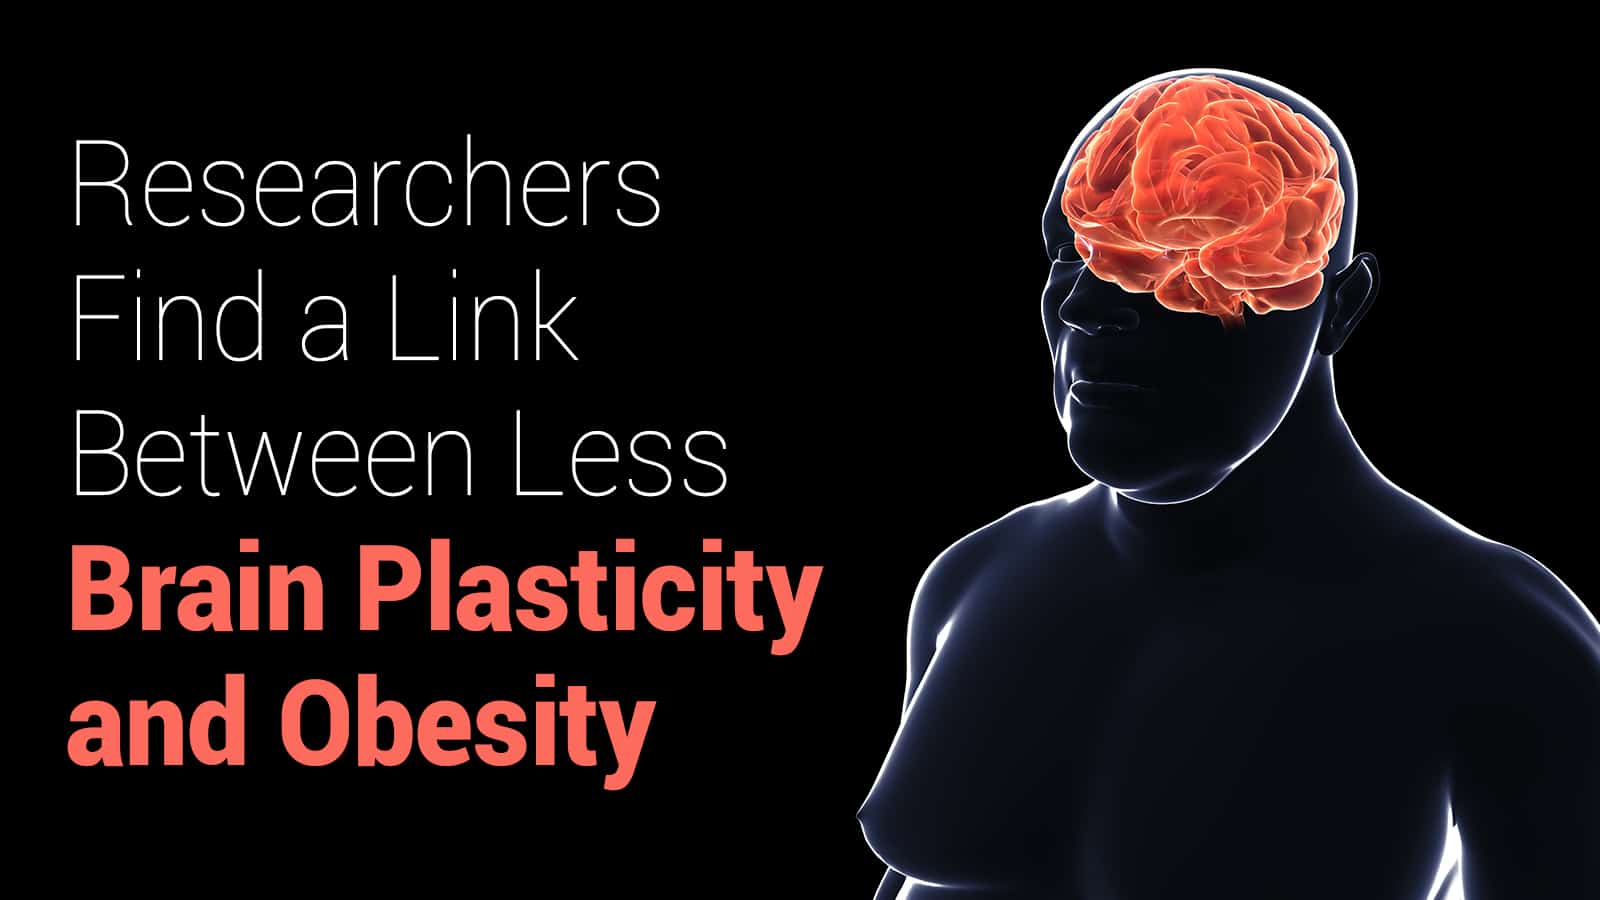 Researchers Find a Link Between Less Brain Plasticity and Obesity